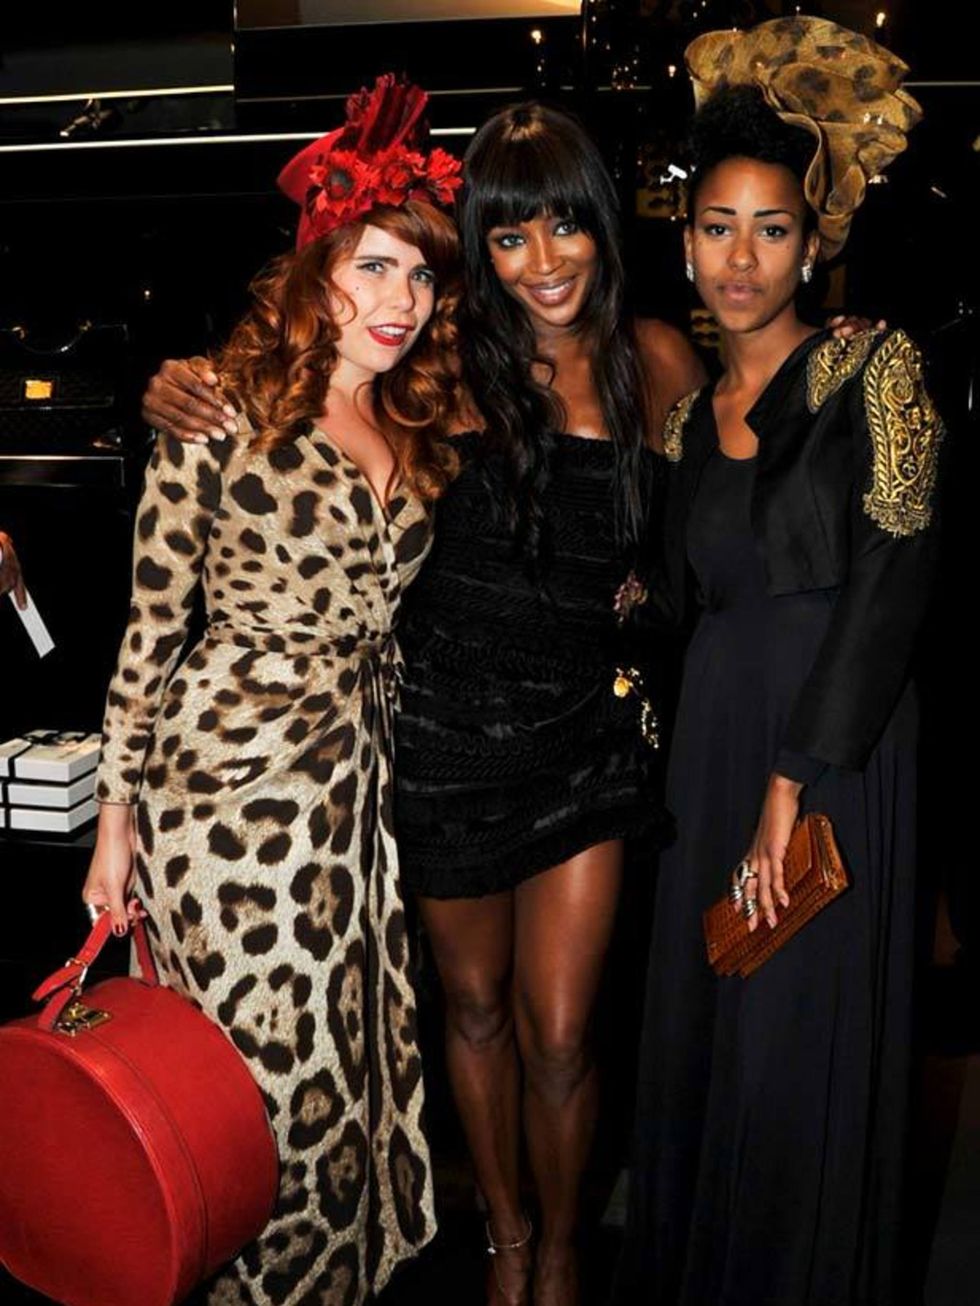 <p><a href="http://www.elleuk.com/catwalk/collections/ppq/spring-summer-2011/front-row"> Paloma Faith</a> &amp; <a href="%20http%3A//www.elleuk.com/starstyle/style-files/%28section%29/naomi-campbell/%28offset%29/0/%28img%29/469627">Naomi Campbell </a></p>